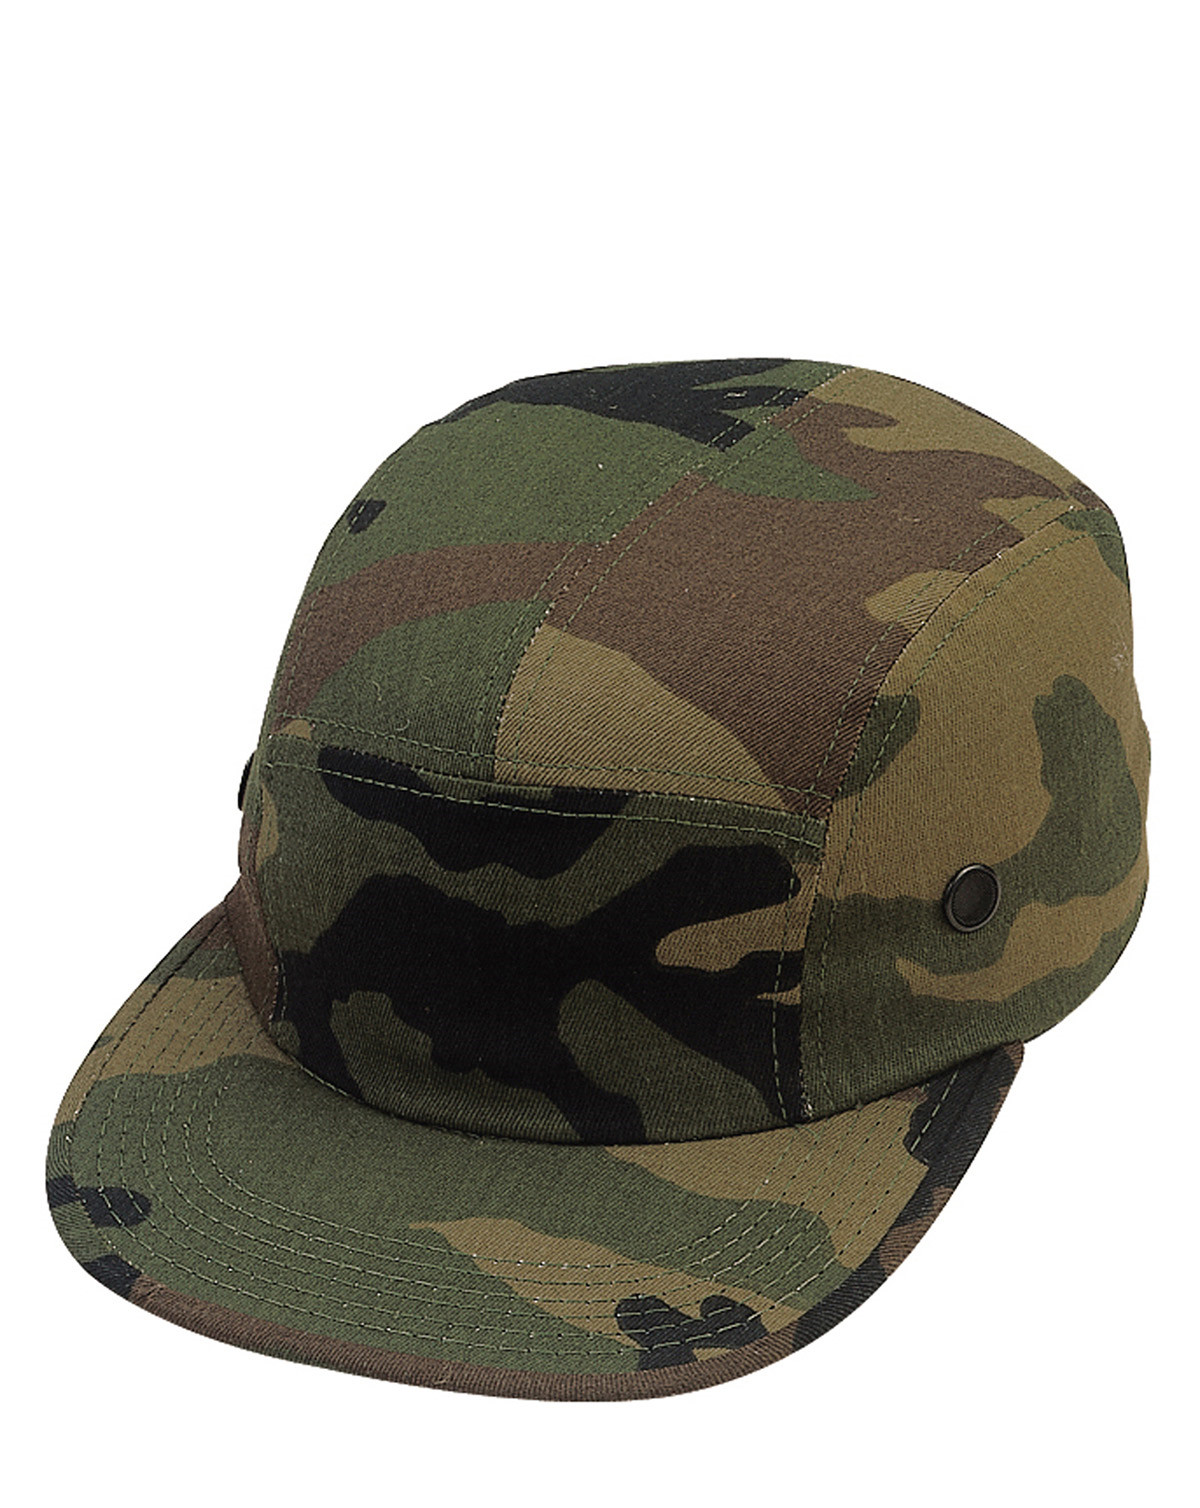 Rothco 5 Panel Military Street Cap (Woodland, One Size)